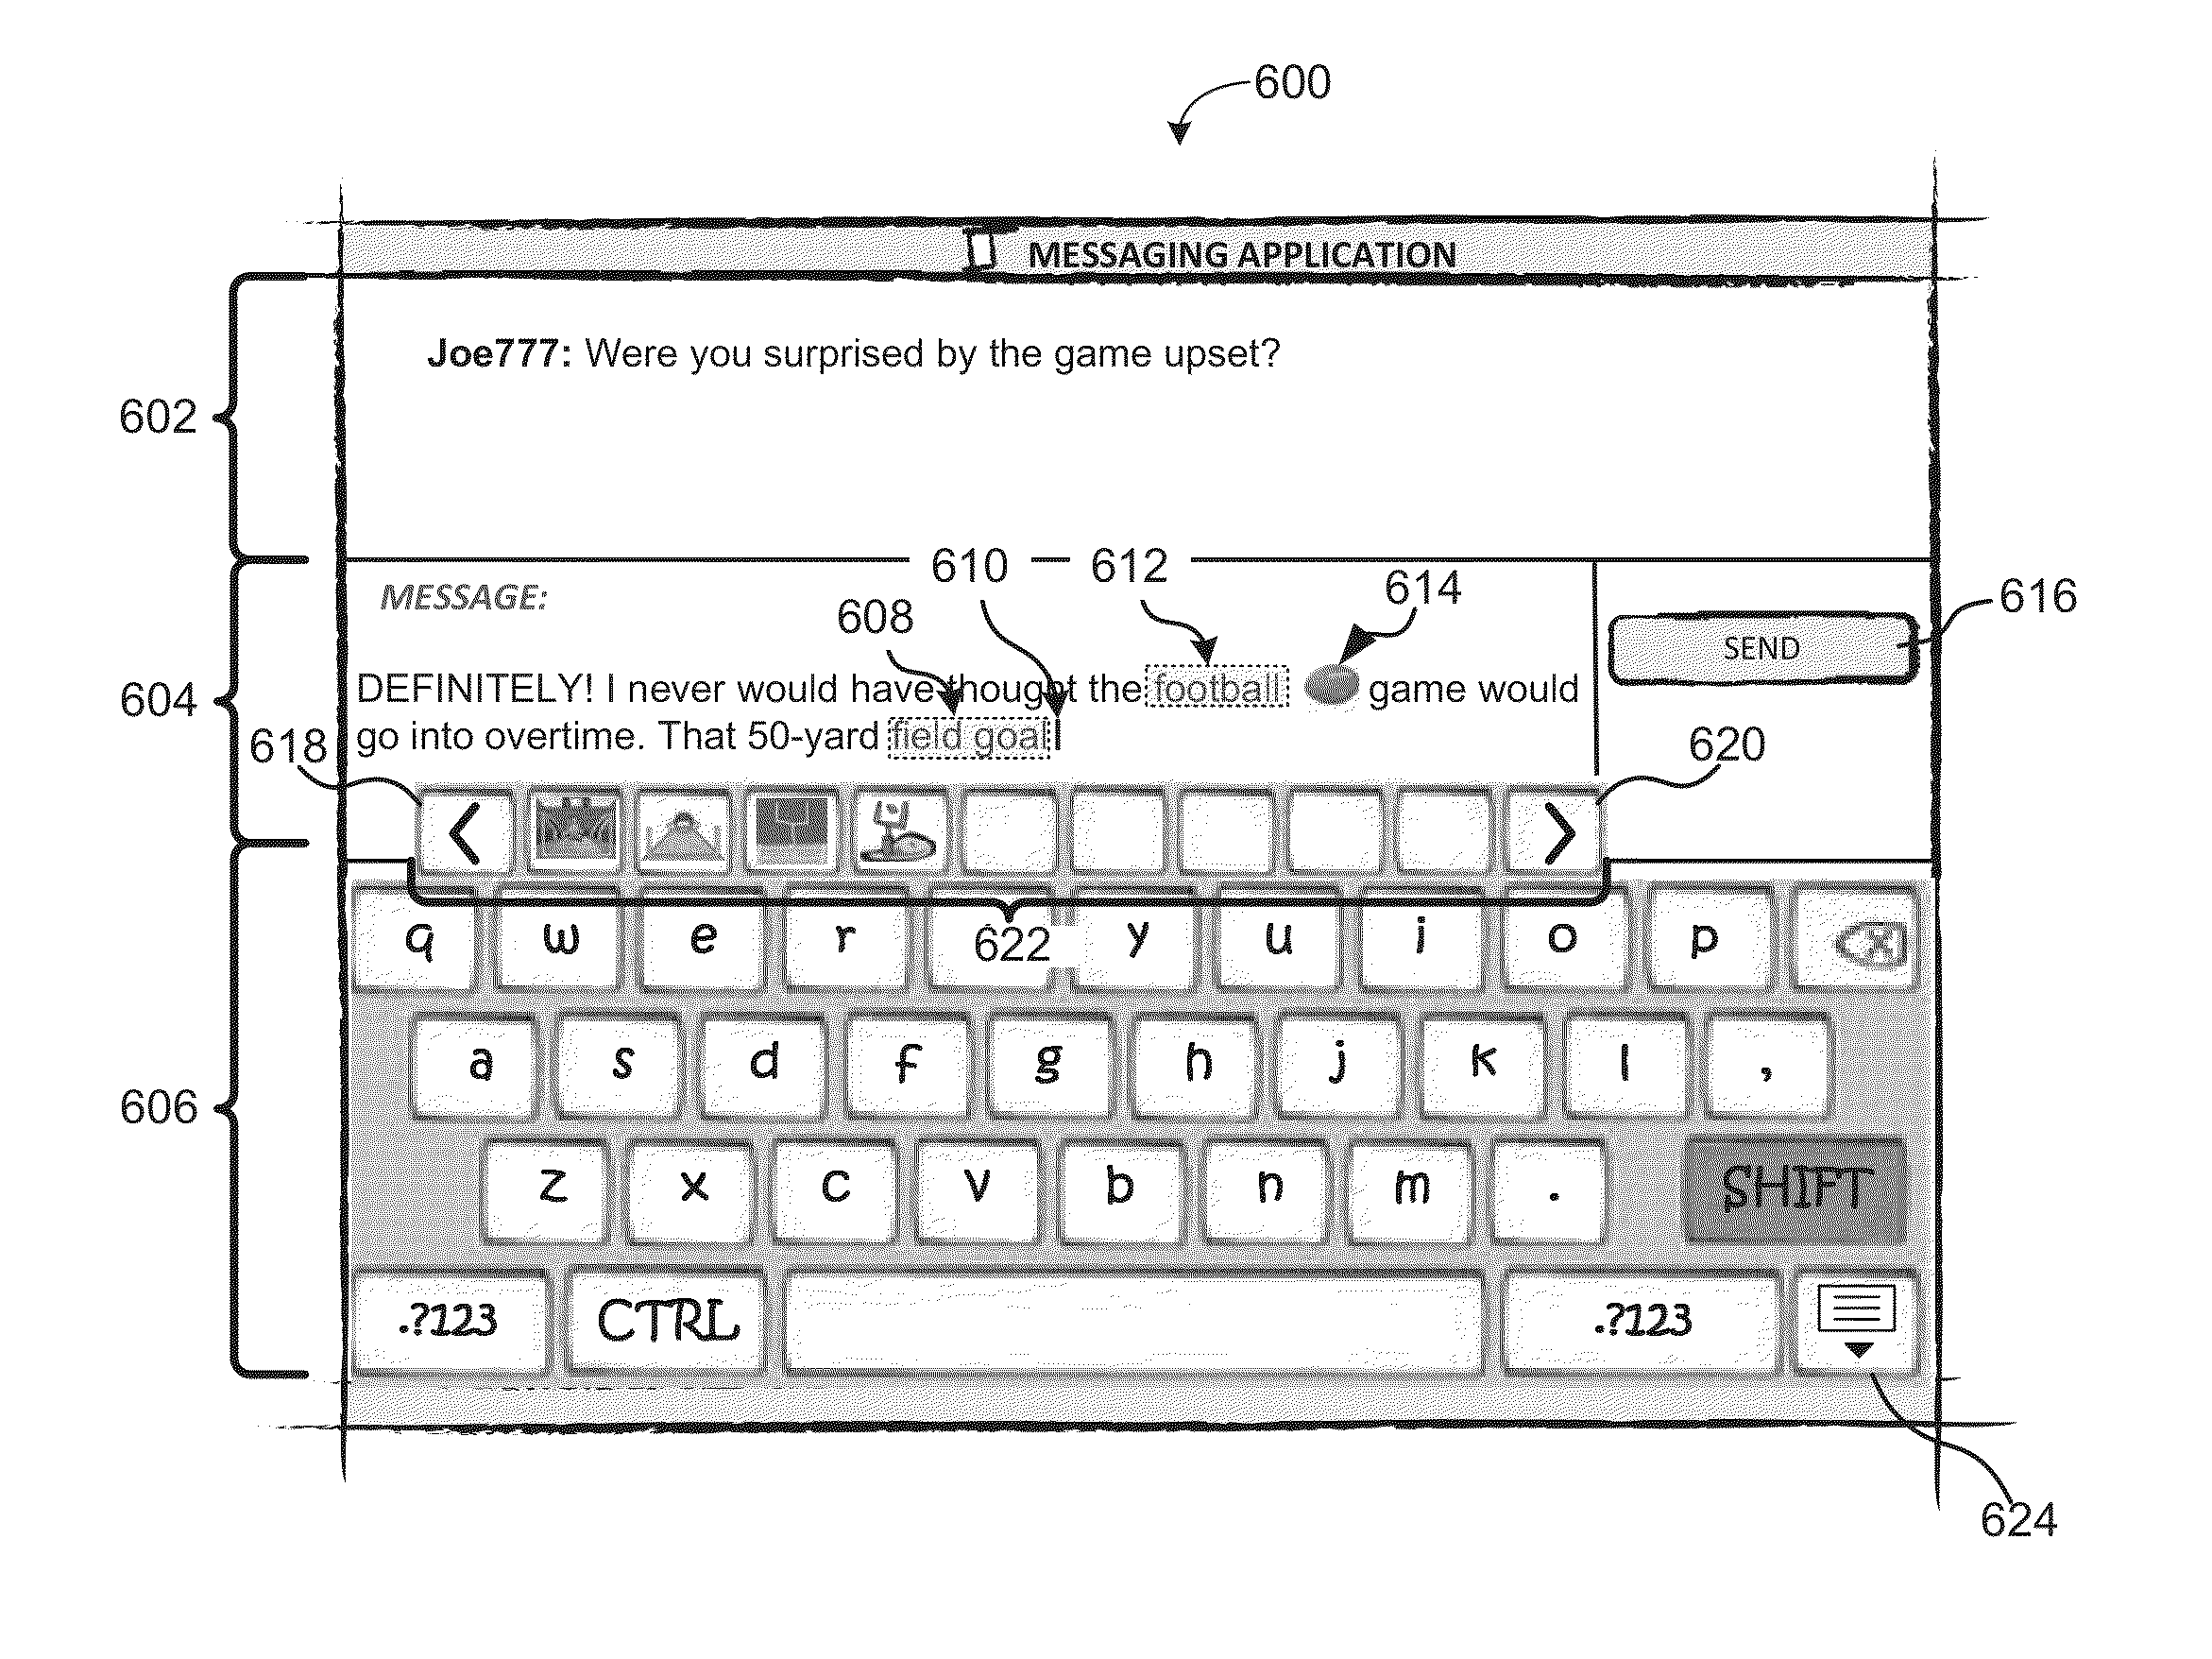 Systems and methods for identifying and suggesting emoticons